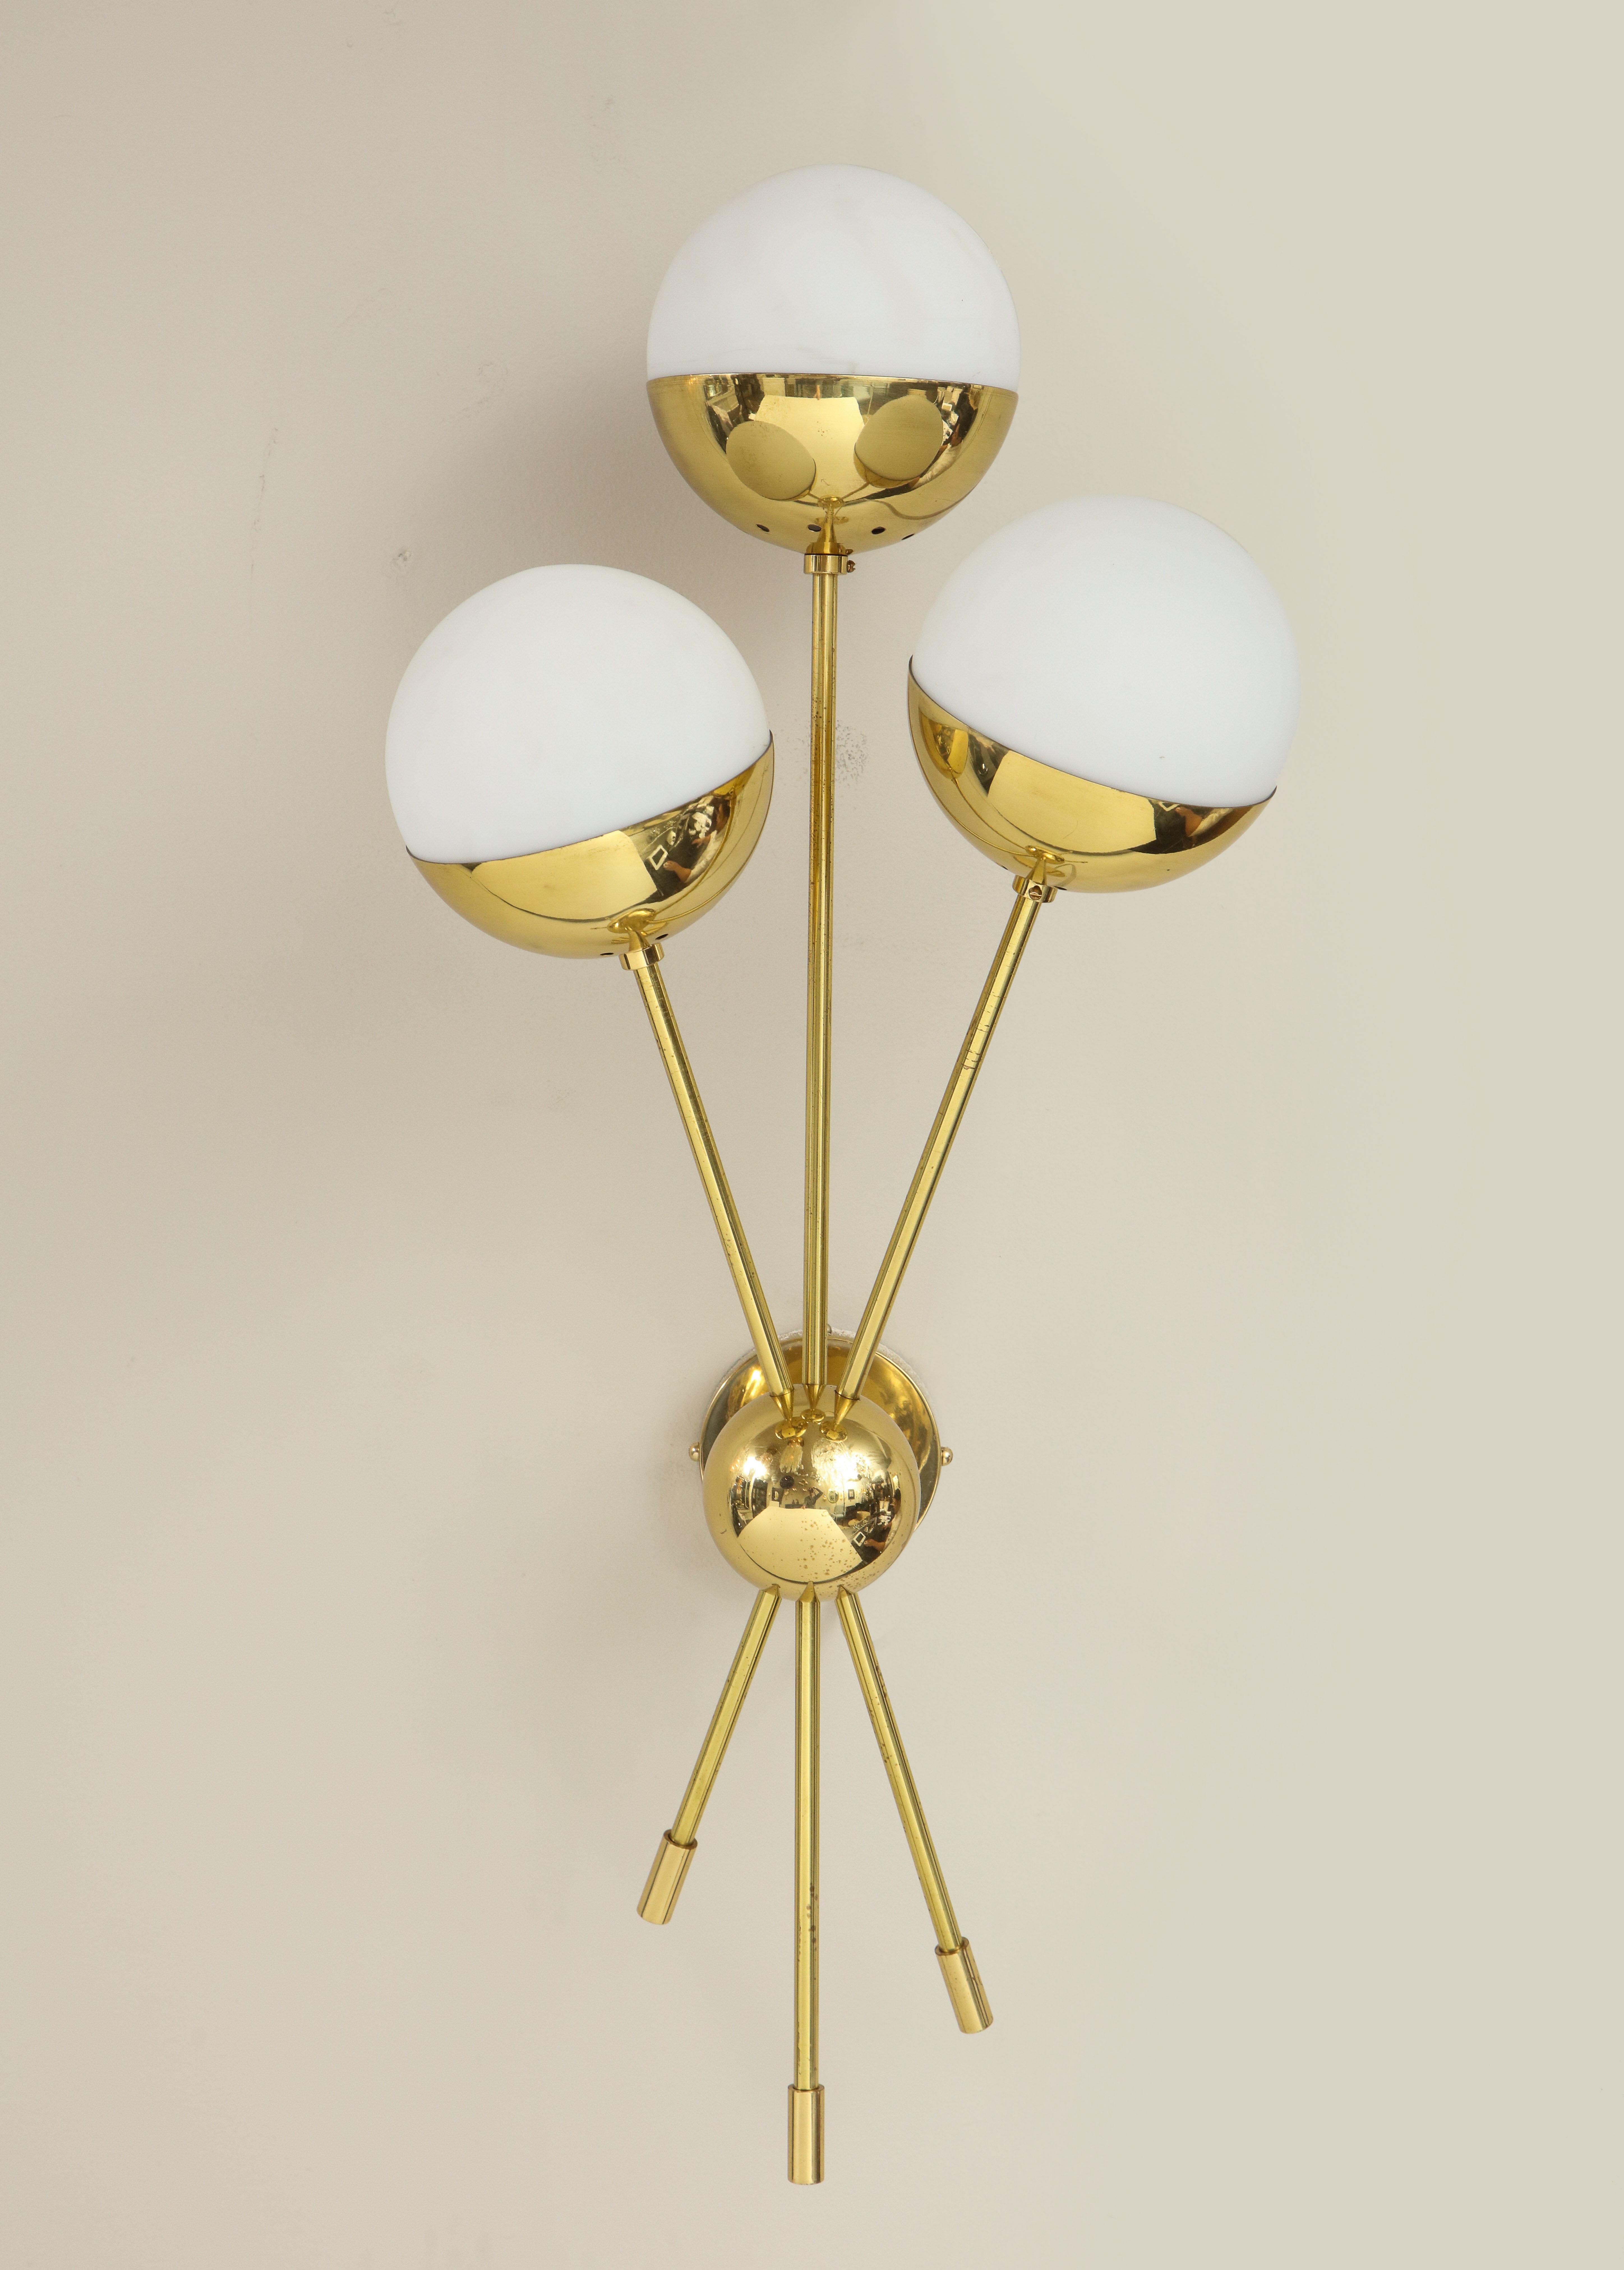 A chic pair of vintage Stilnovo sconces with 3 opaline globes in polished brass. The sconces has been rewired for the U.S standard. slight aging showing on brass finish that is consistent with age.